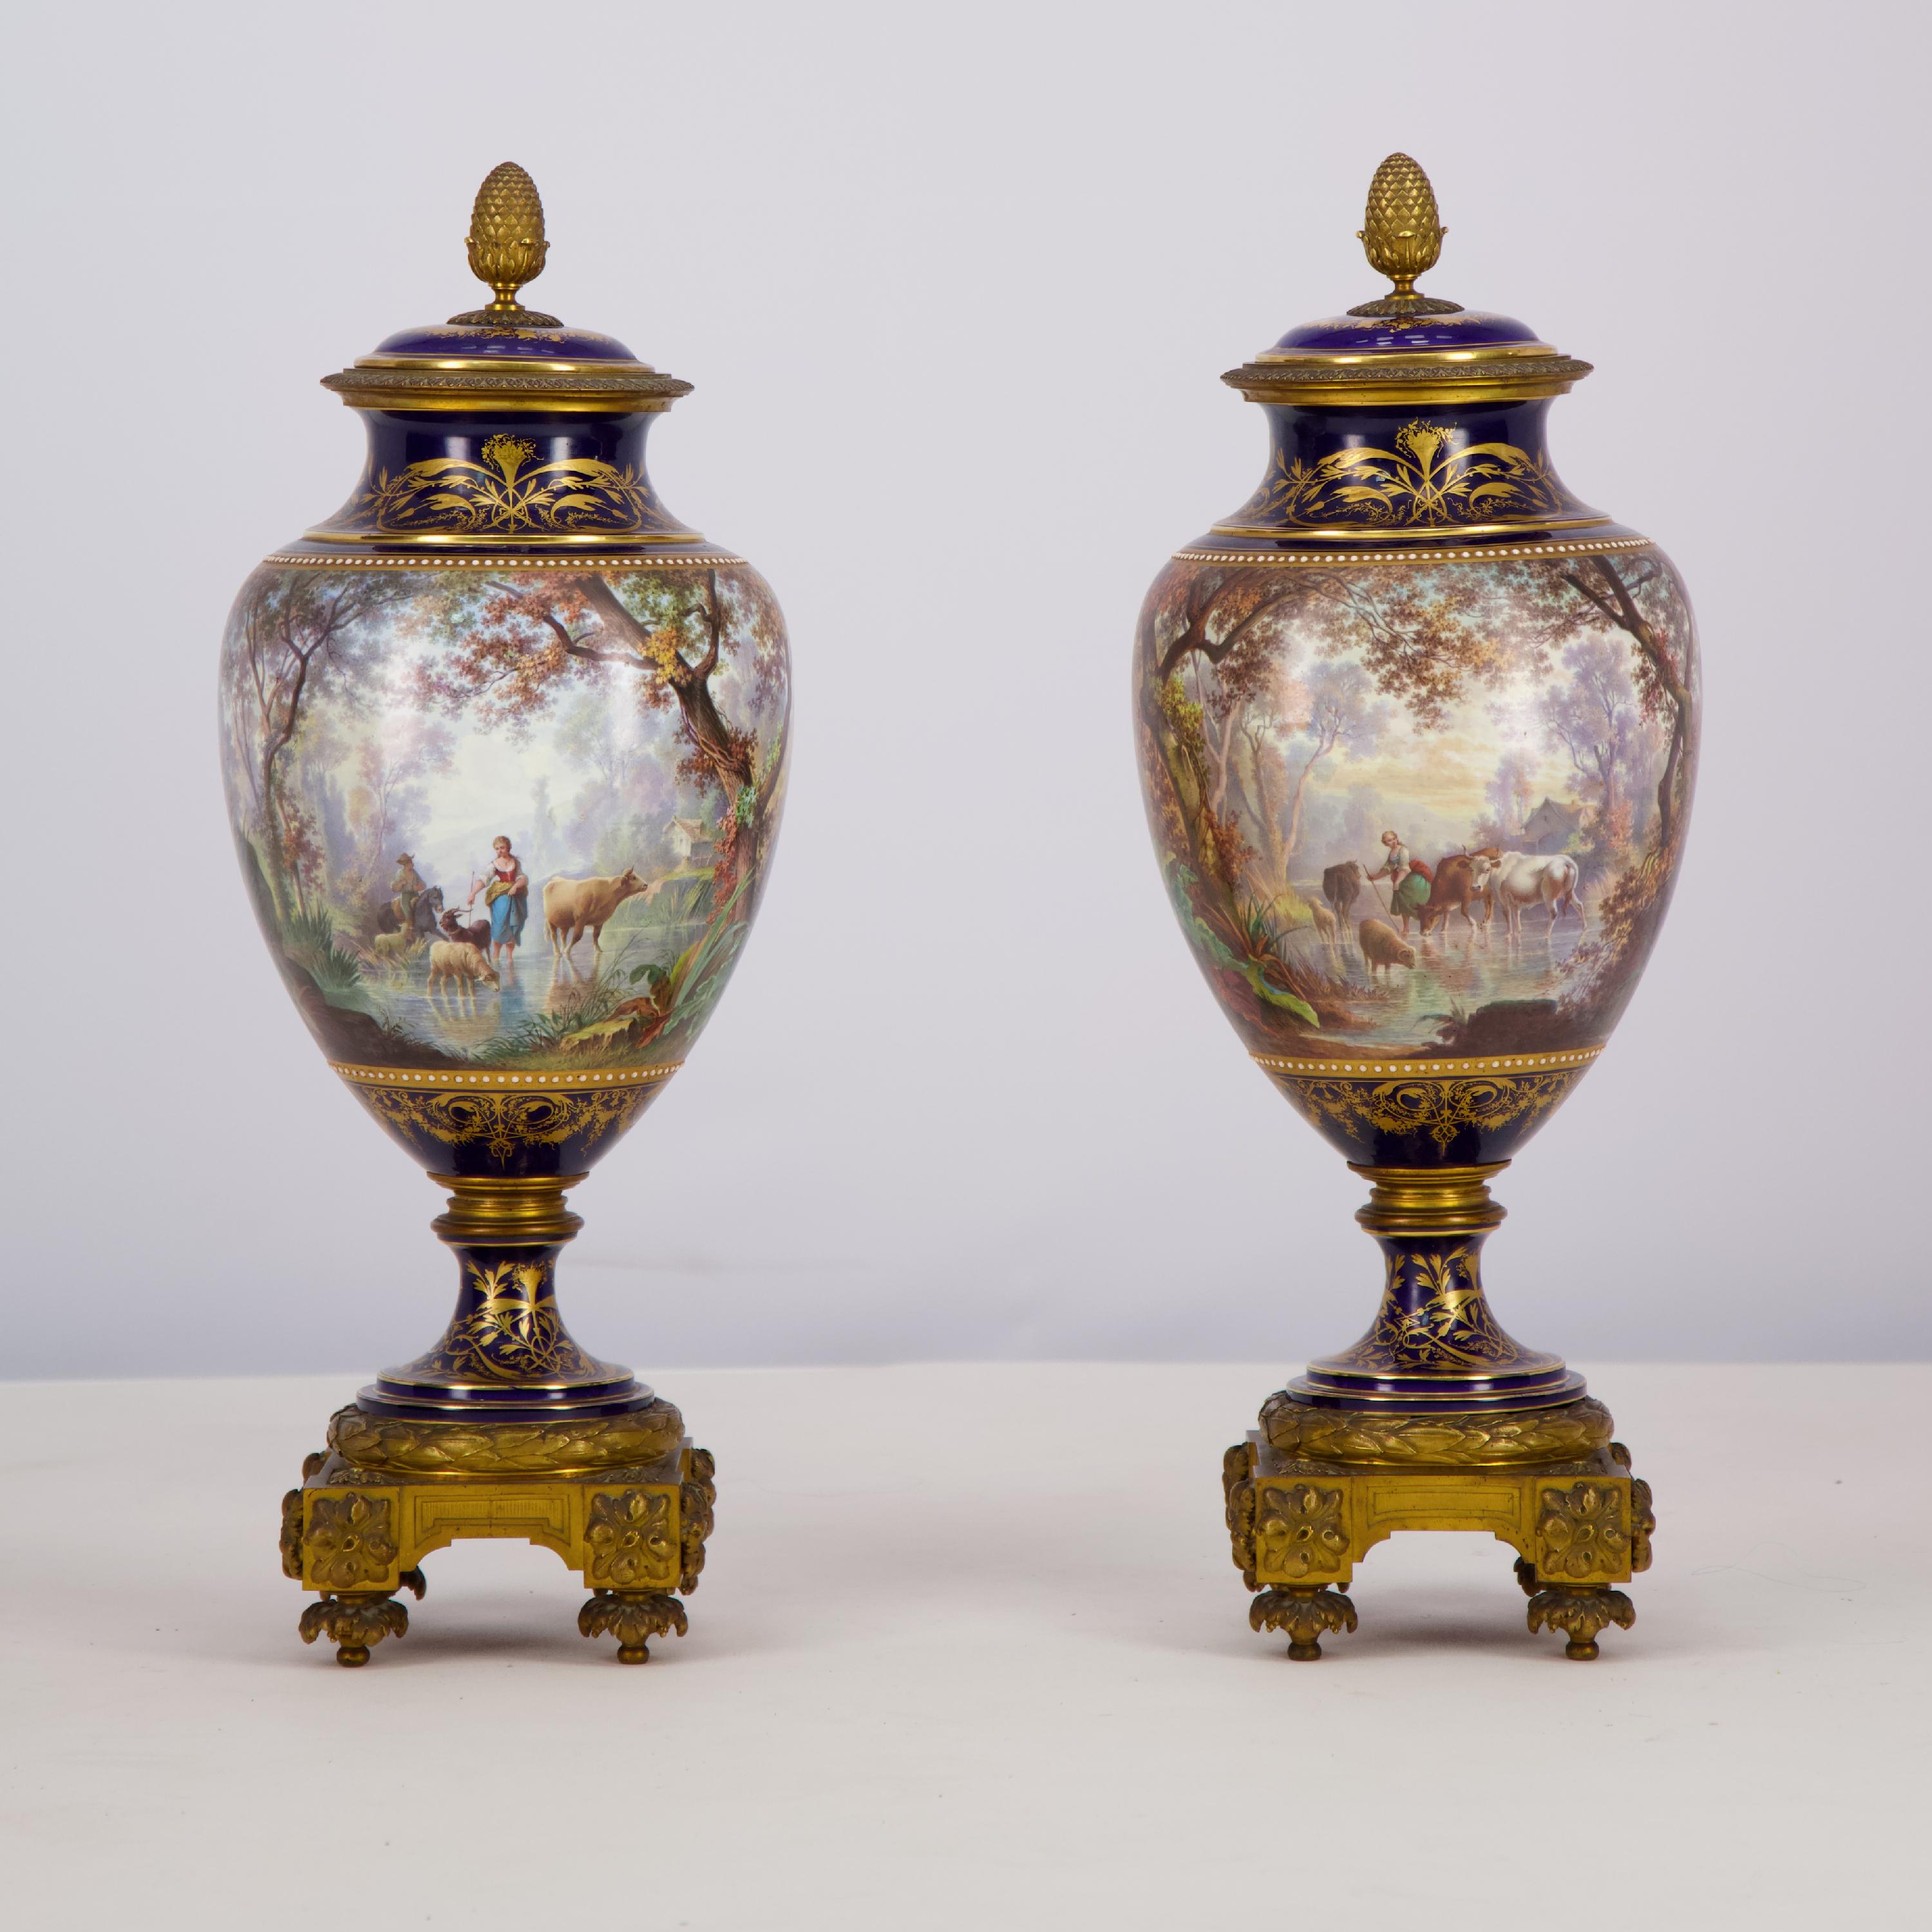 Gilt Pair of Sèvres porcelain vases mounted in gilt bronze painted by J. Machereau For Sale